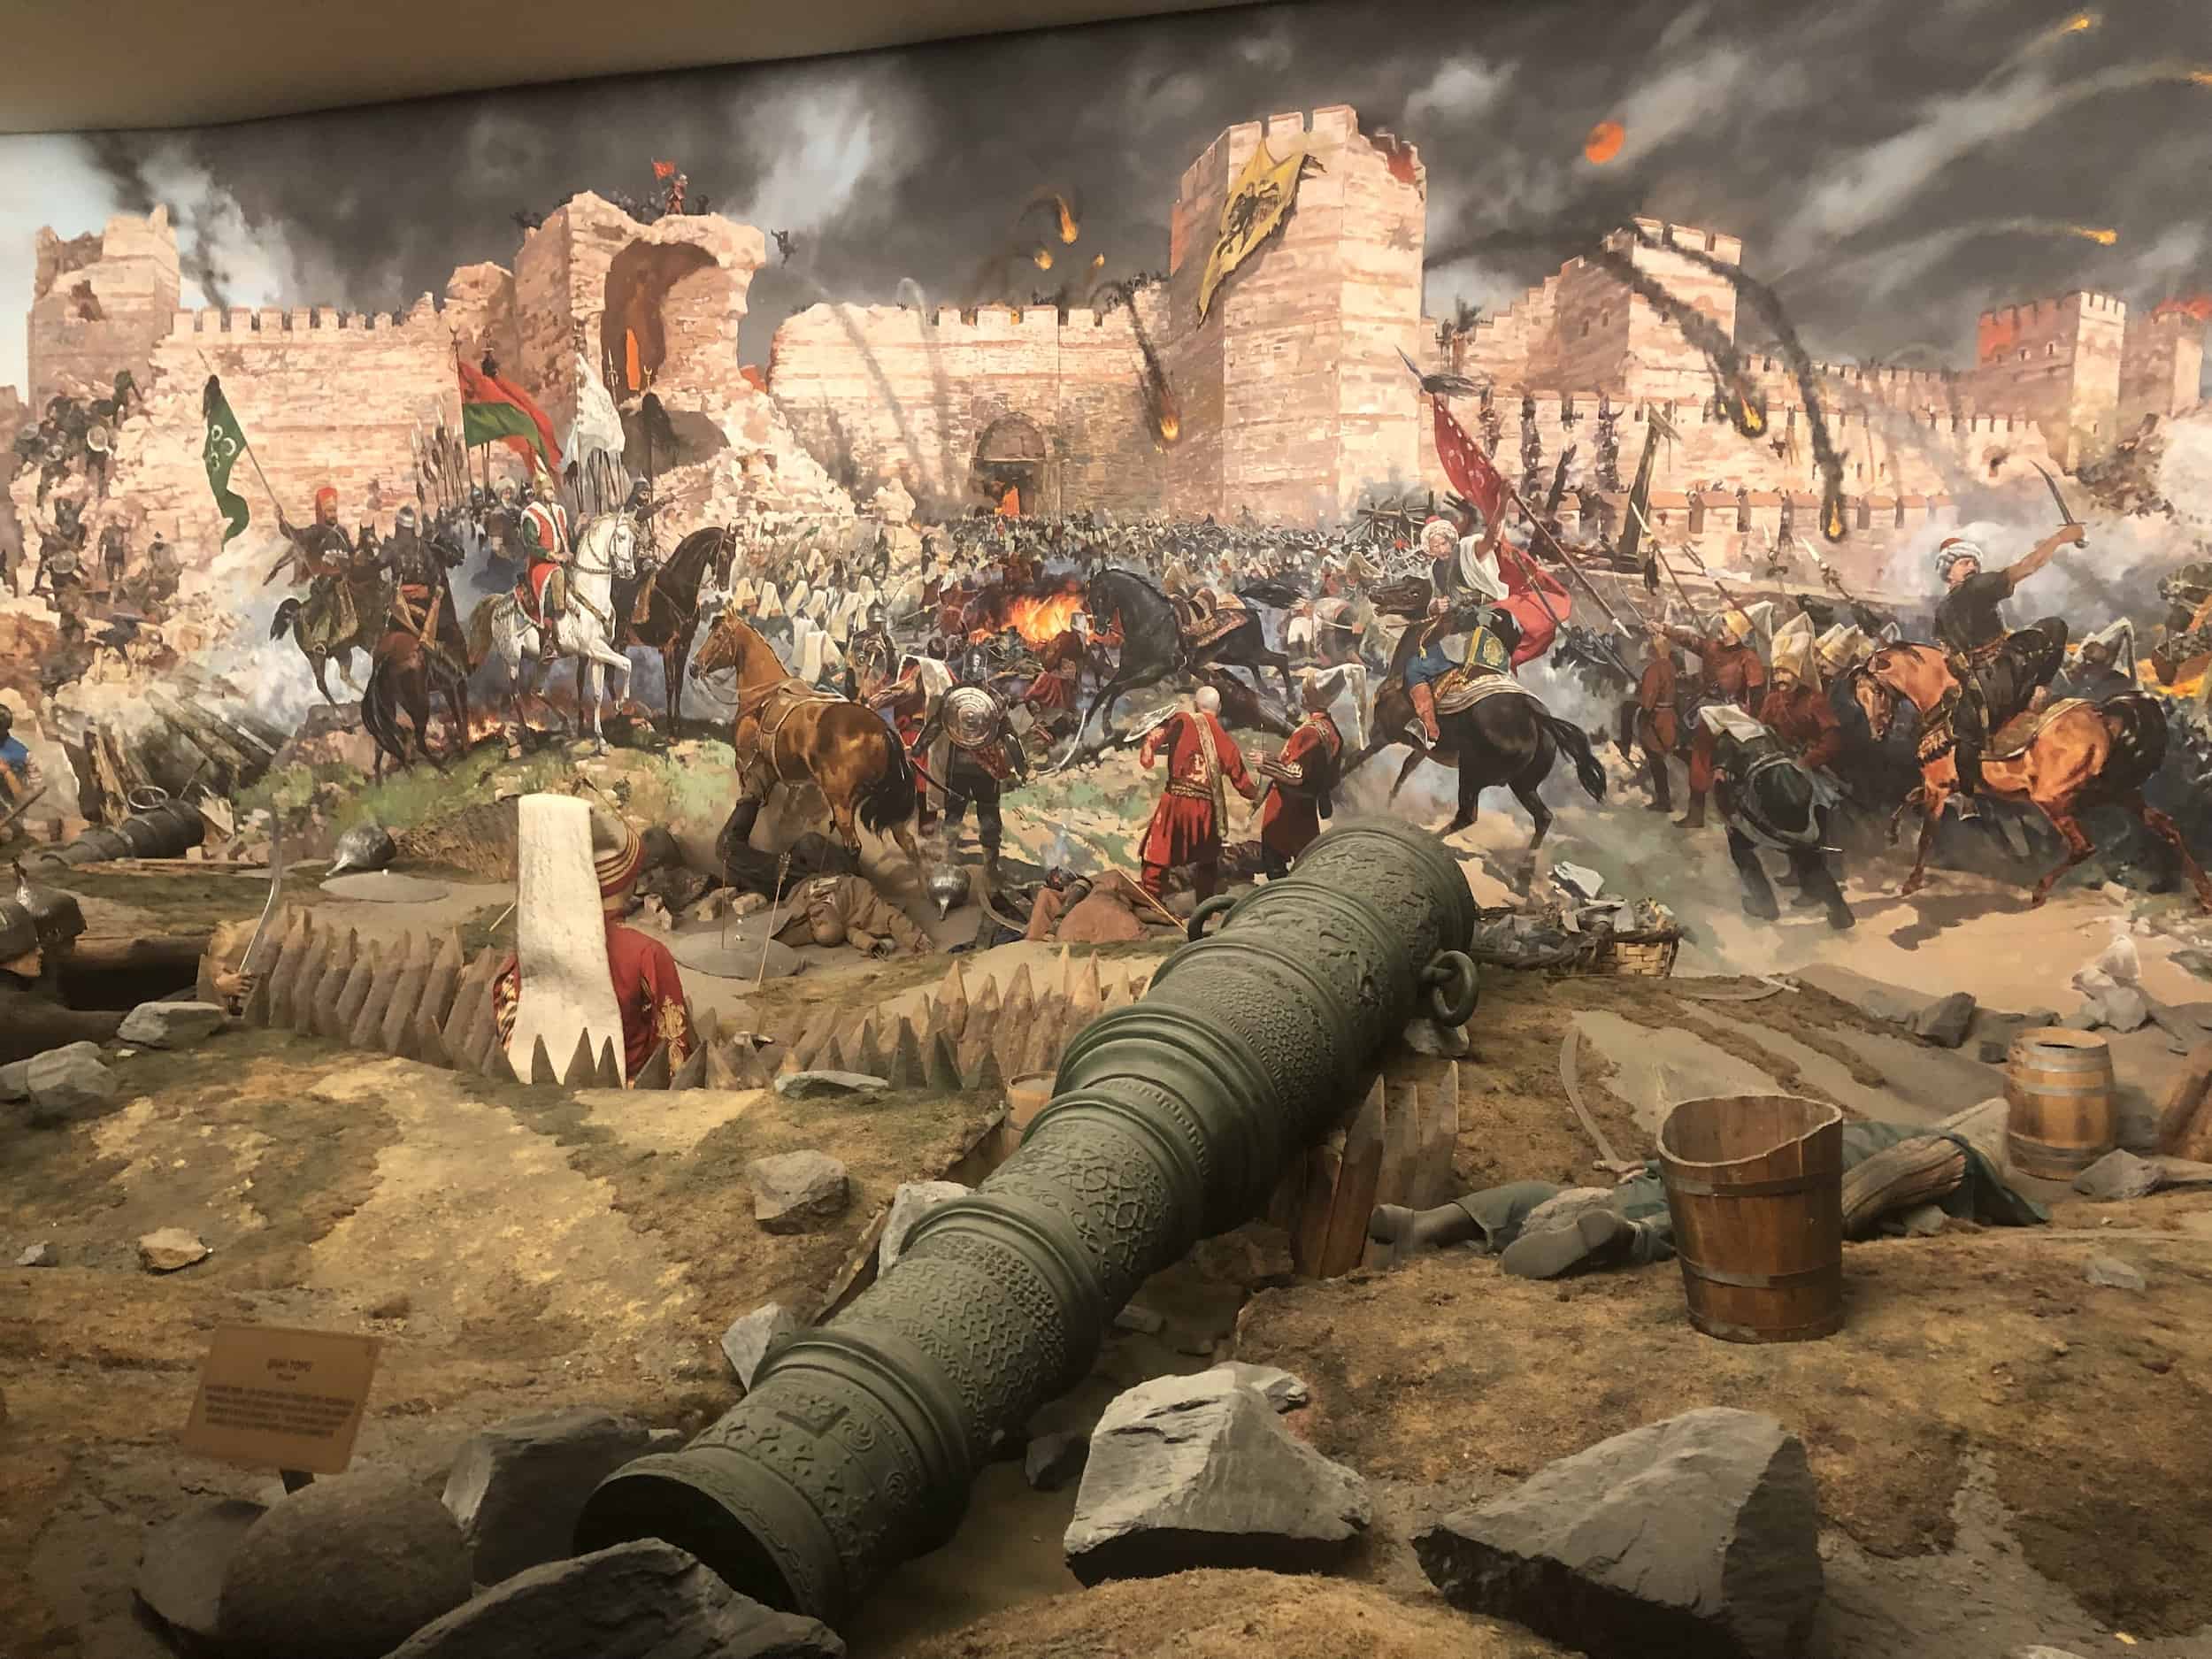 Diorama of the Conquest of Constantinople